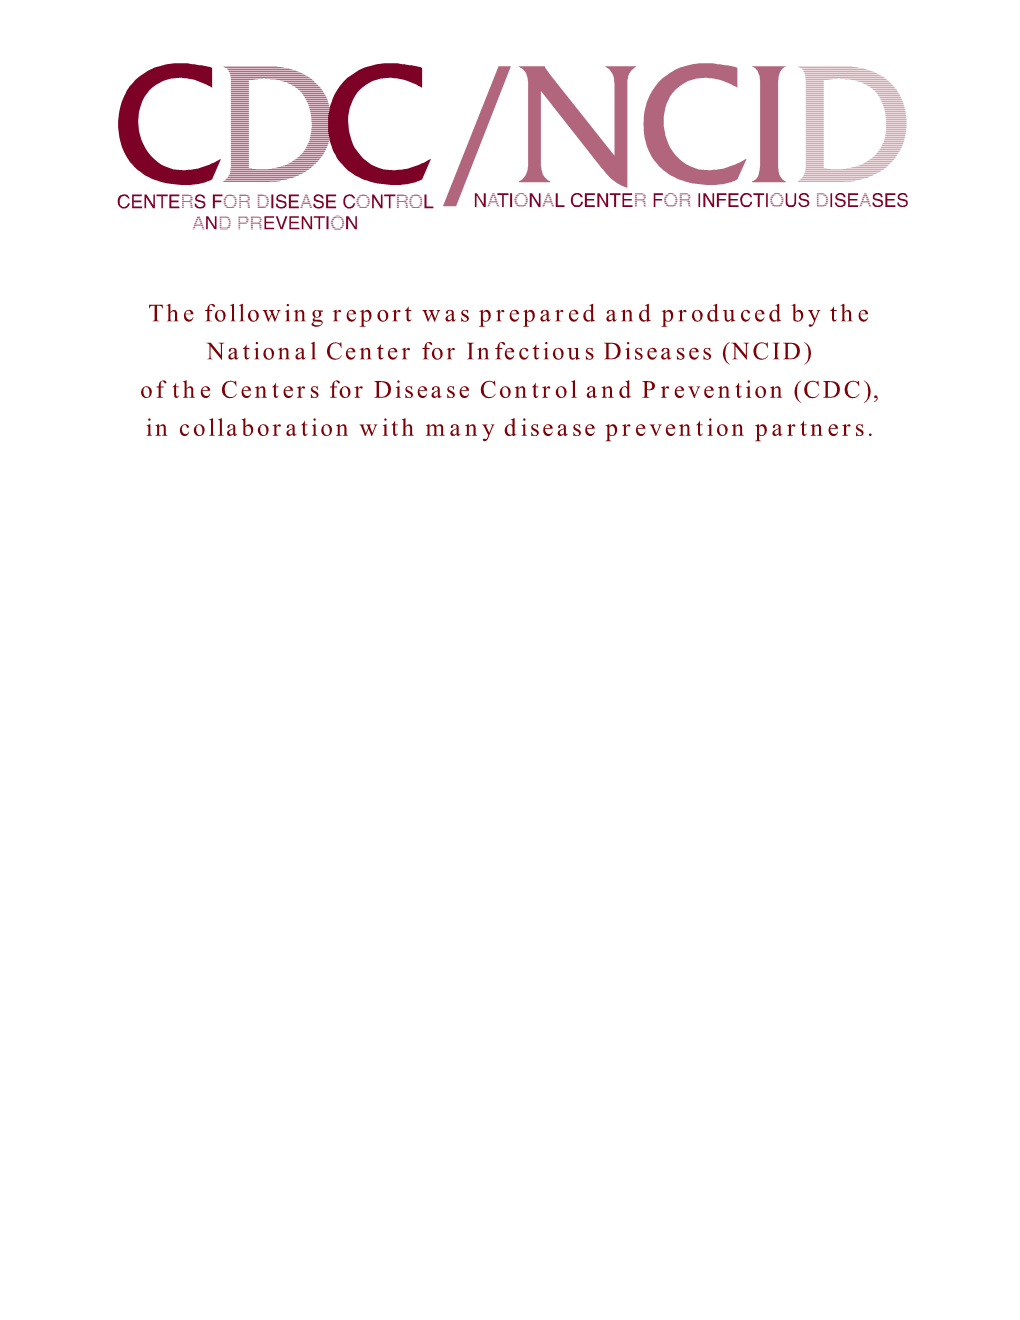 (NCID) of the Centers for Disease Control and Prevention (CDC), in Collaboration with Many Disease Prevention Partners